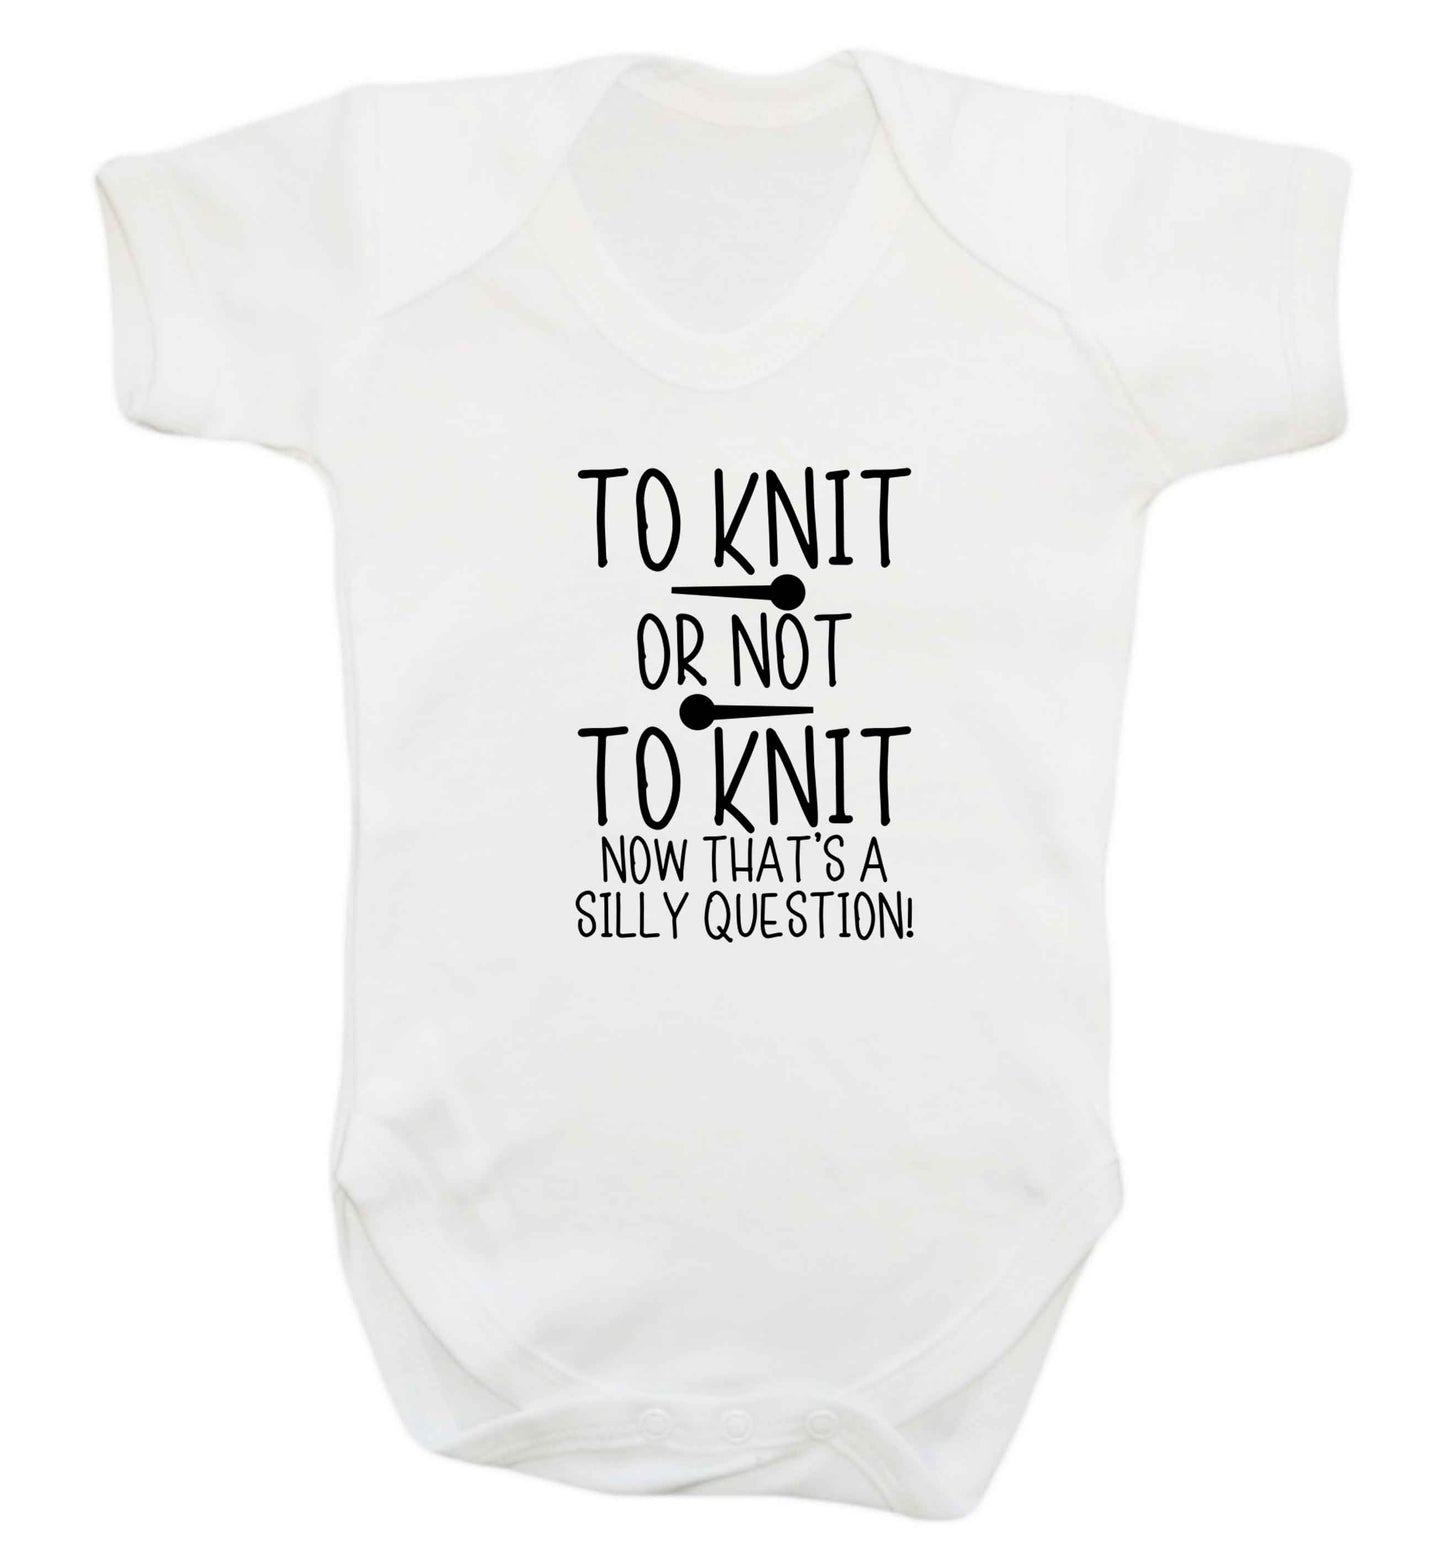 To knit or not to knit now that's a silly question baby vest white 18-24 months